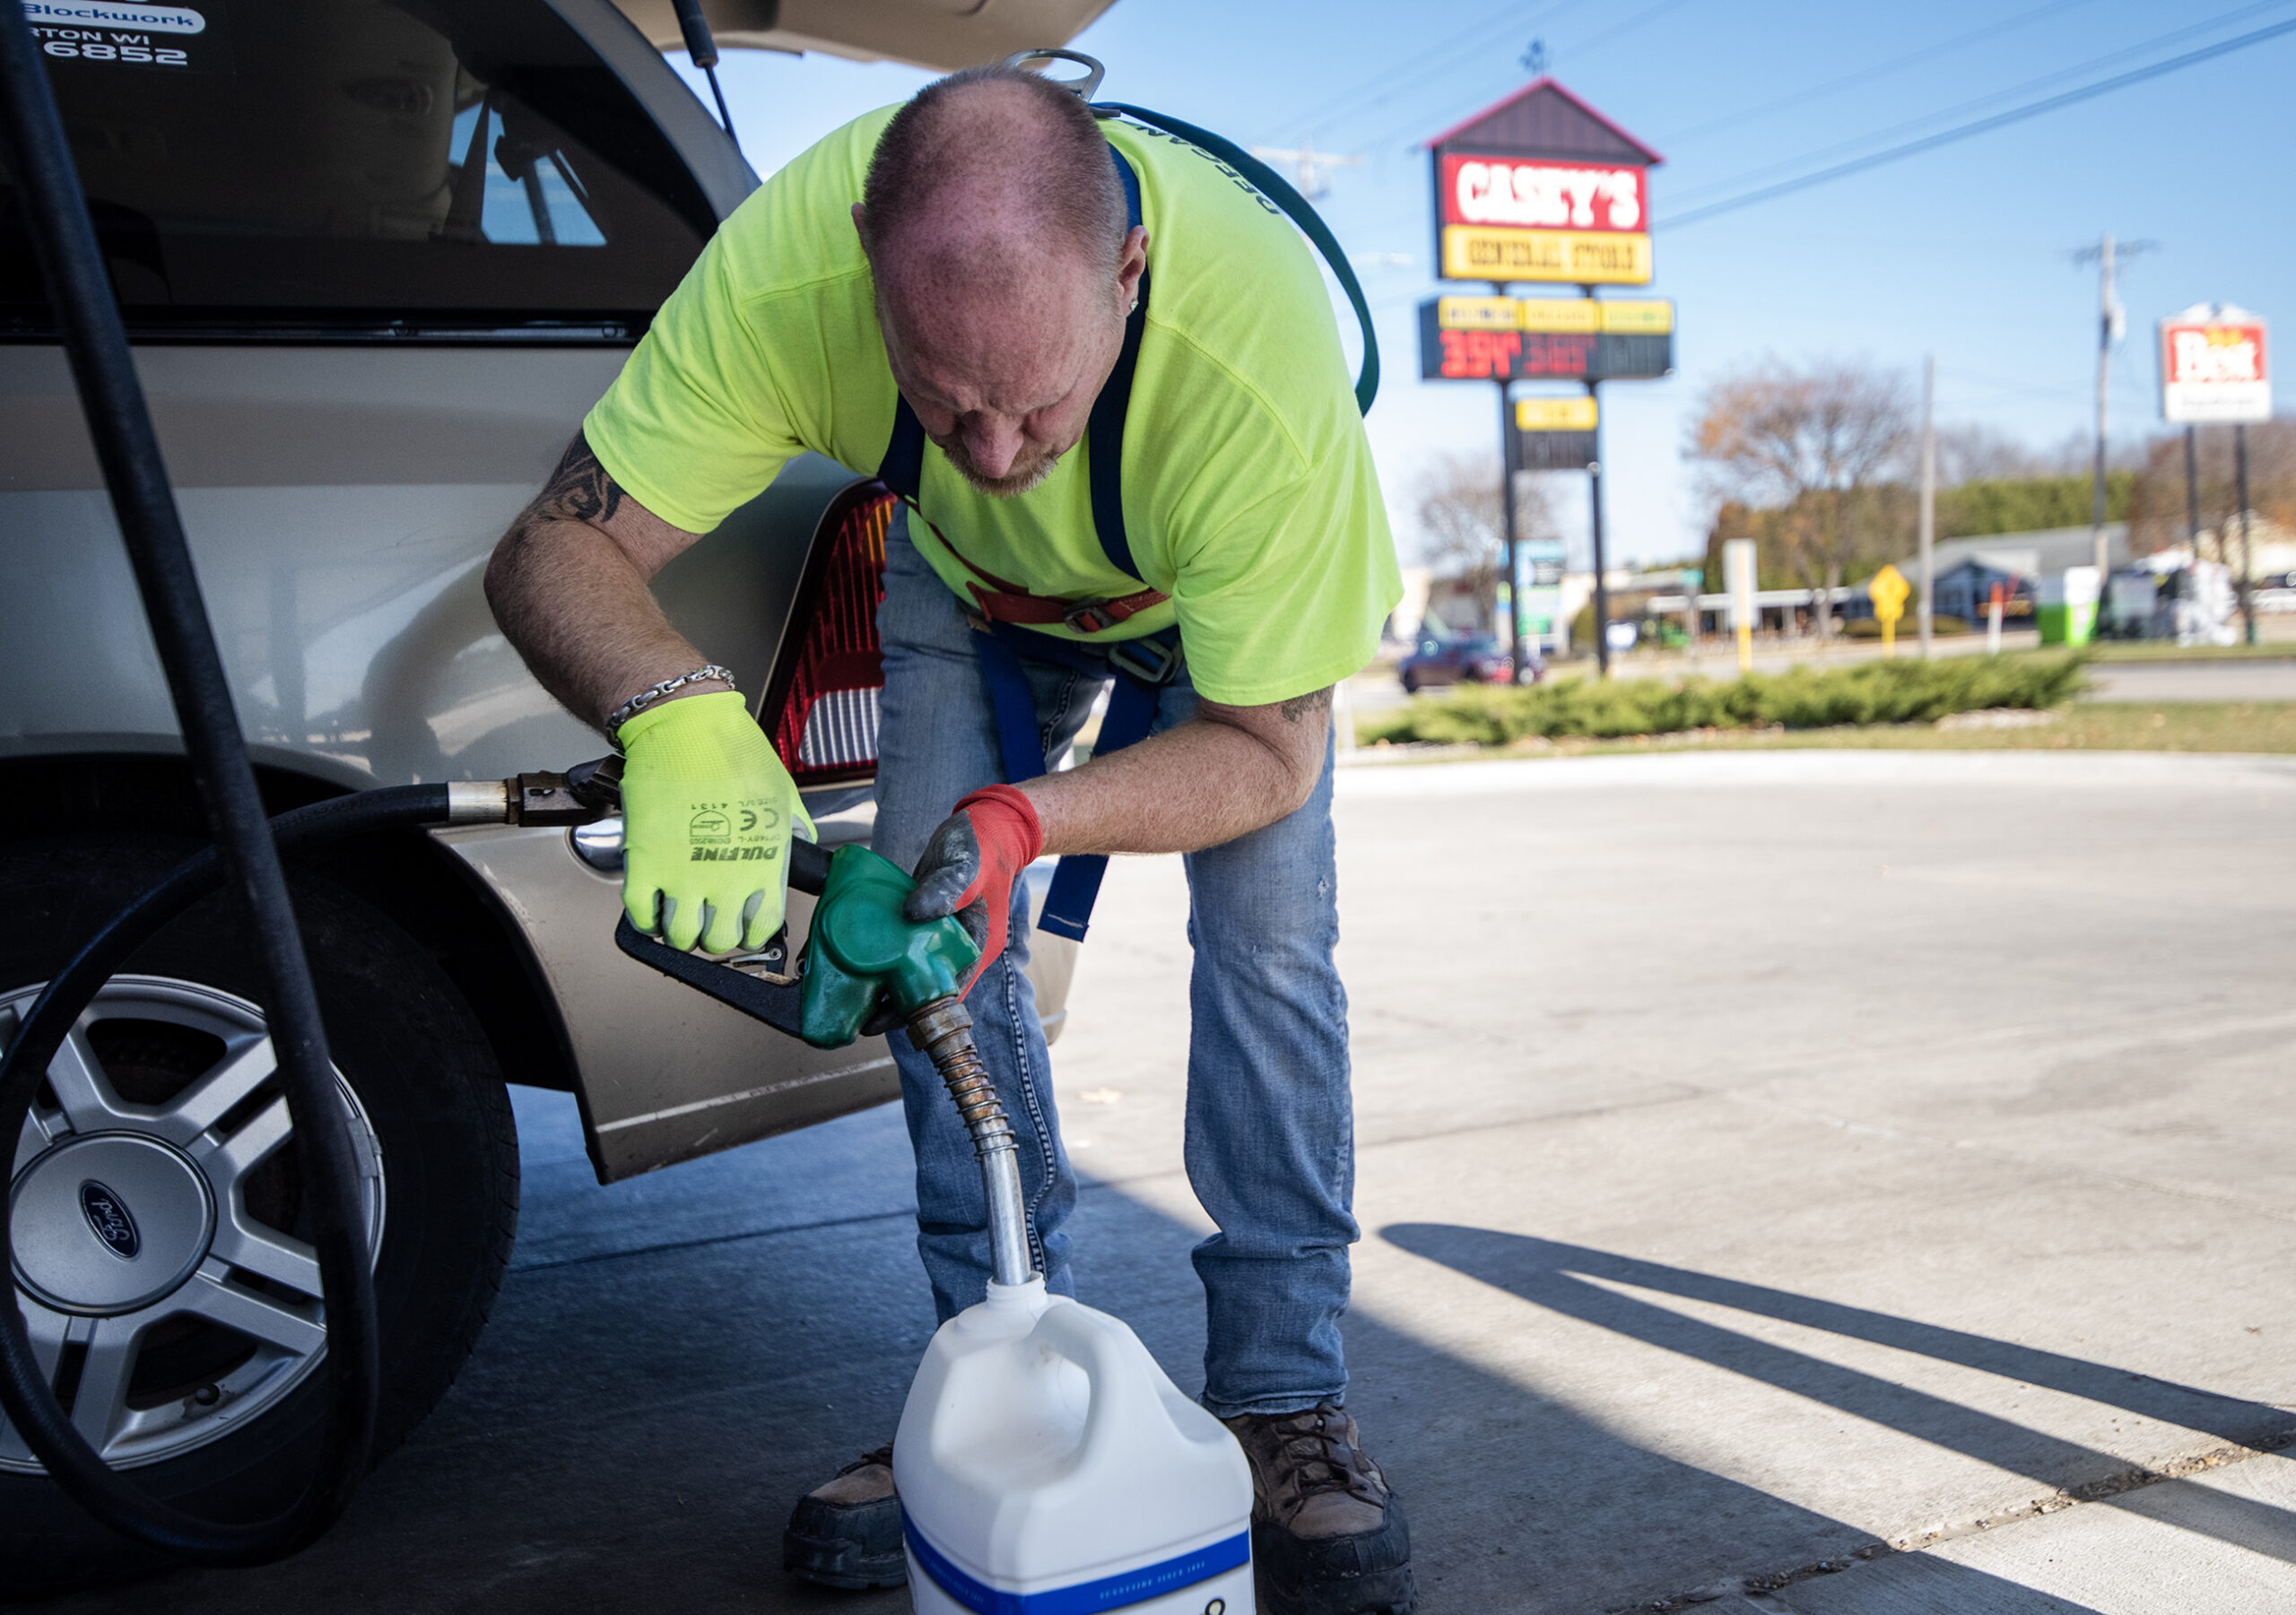 A man leans forward and fills up a tank sitting on the ground. A sign with gas prices can be seen behind him.